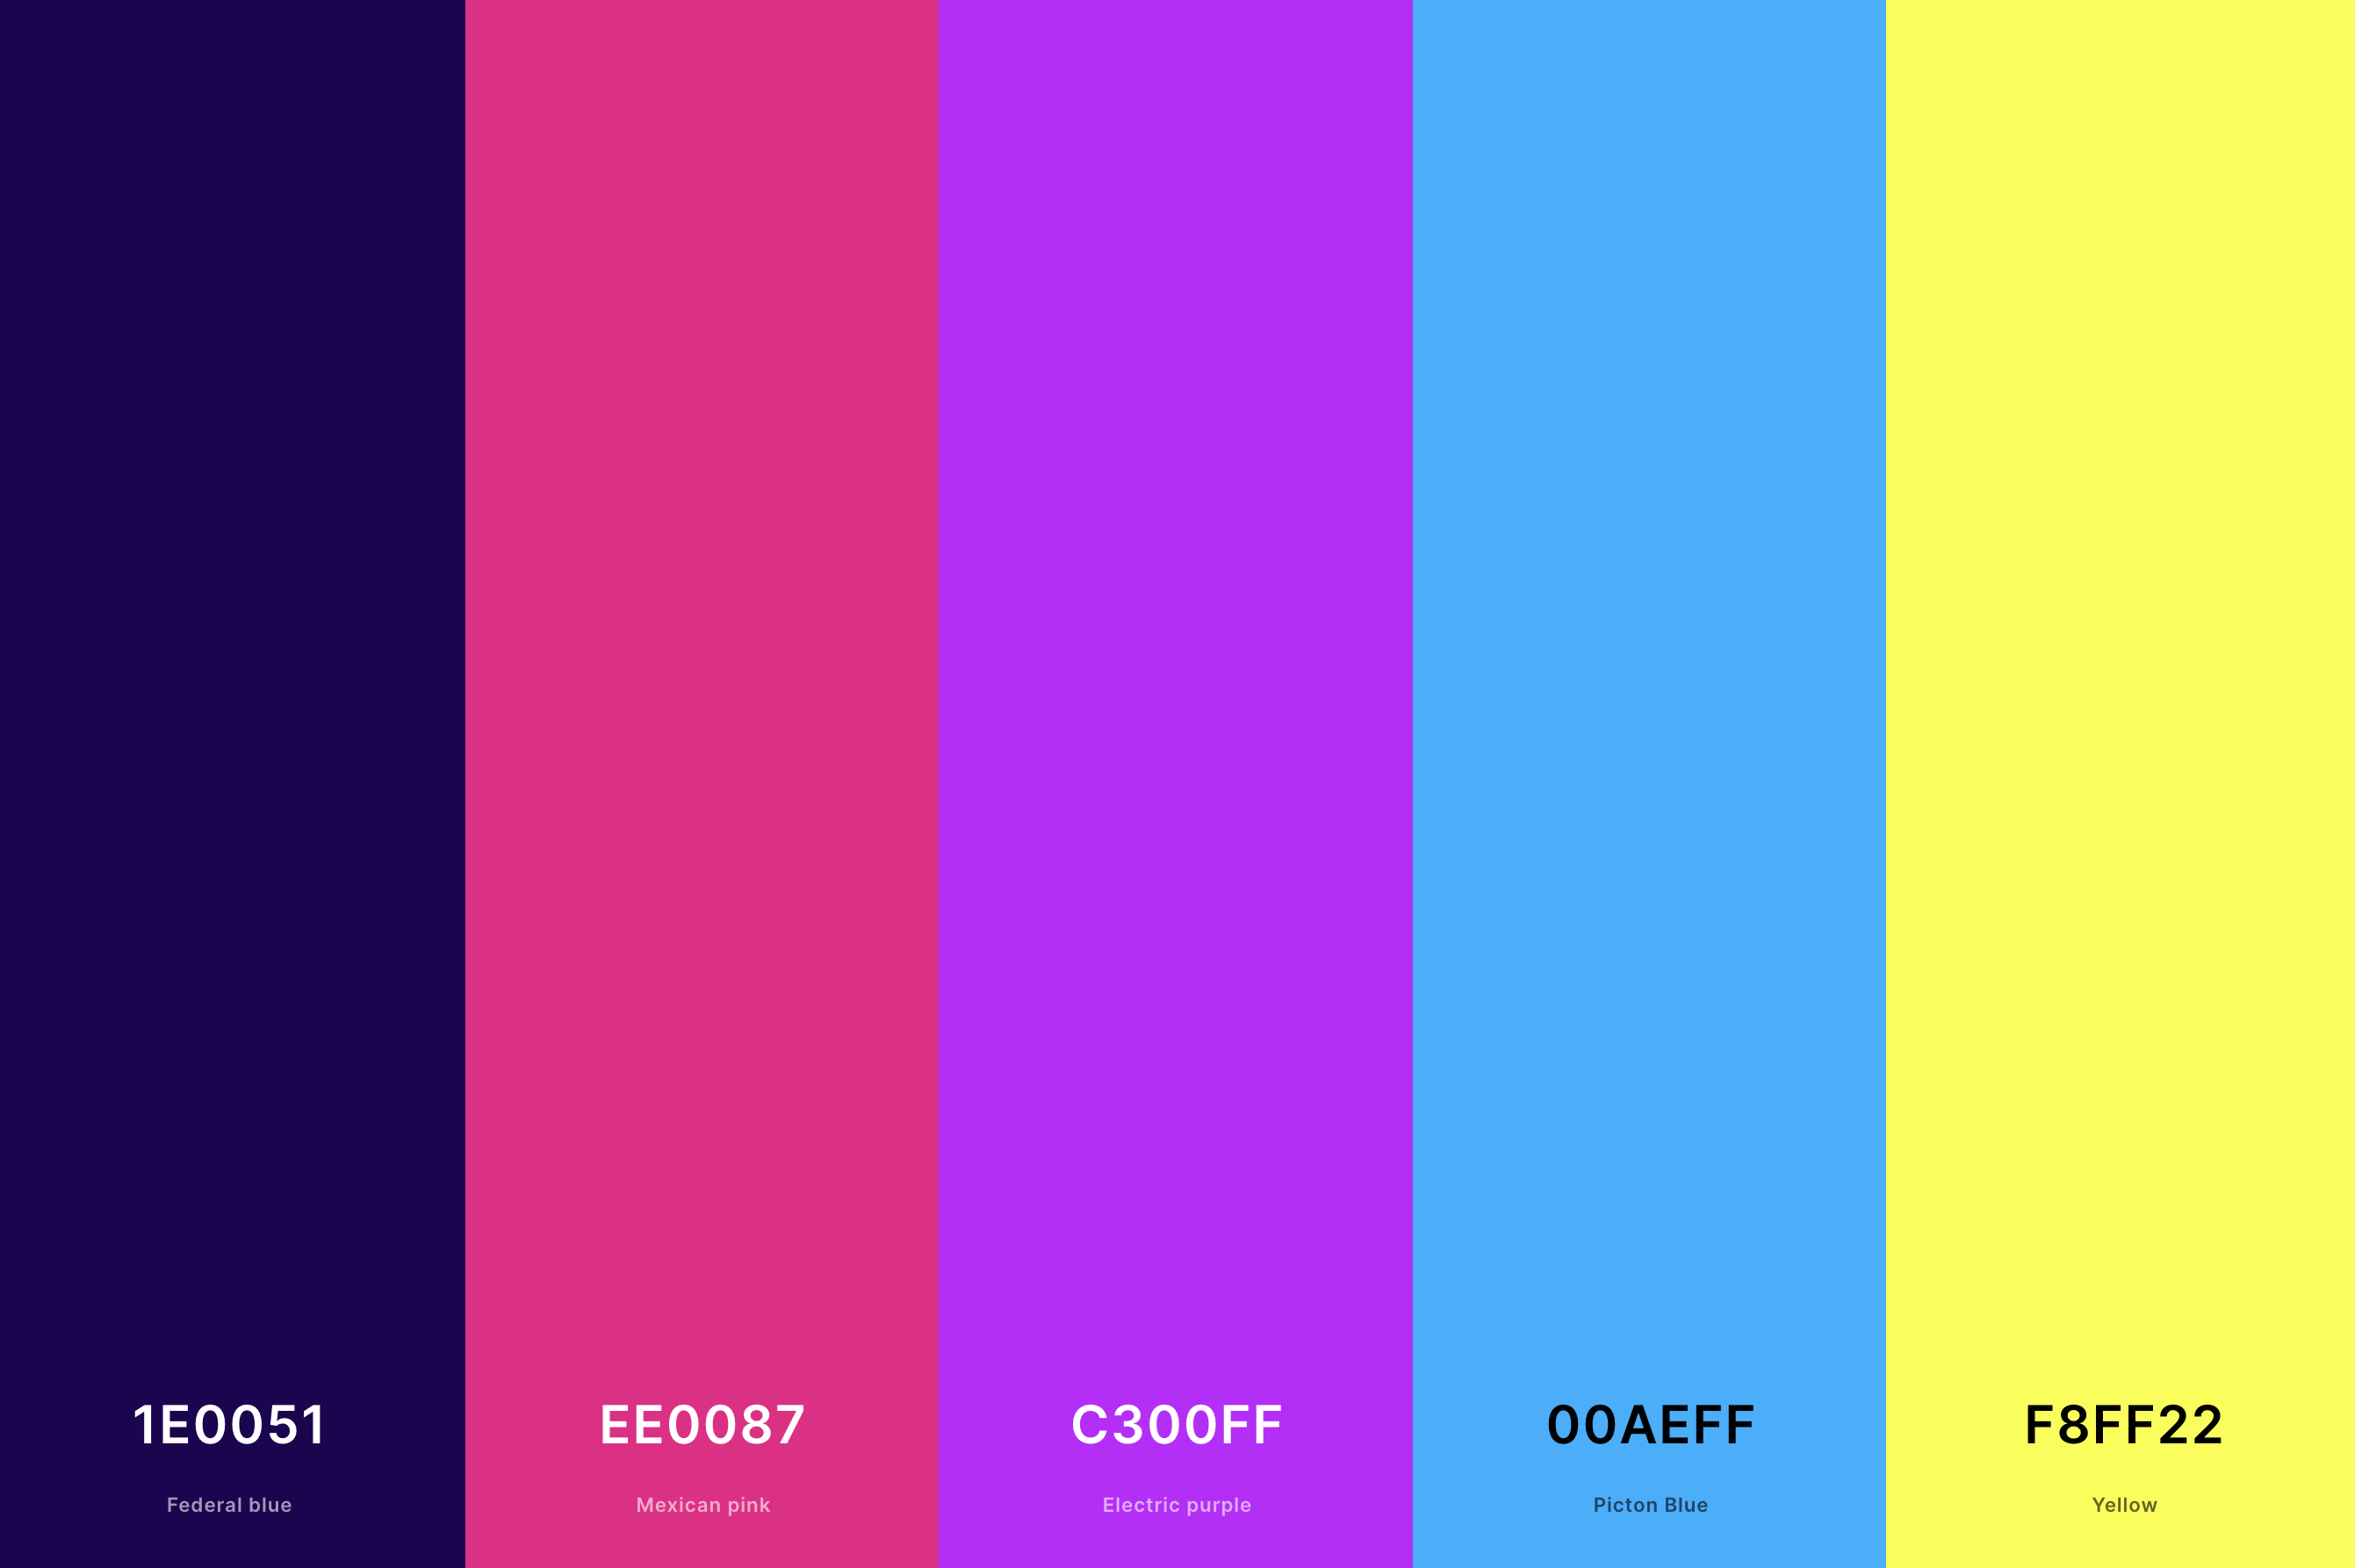 7. Neon Retro Color Palette Color Palette with Federal Blue (Hex #1E0051) + Mexican Pink (Hex #EE0087) + Electric Purple (Hex #C300FF) + Picton Blue (Hex #00AEFF) + Yellow (Hex #F8FF22) Color Palette with Hex Codes